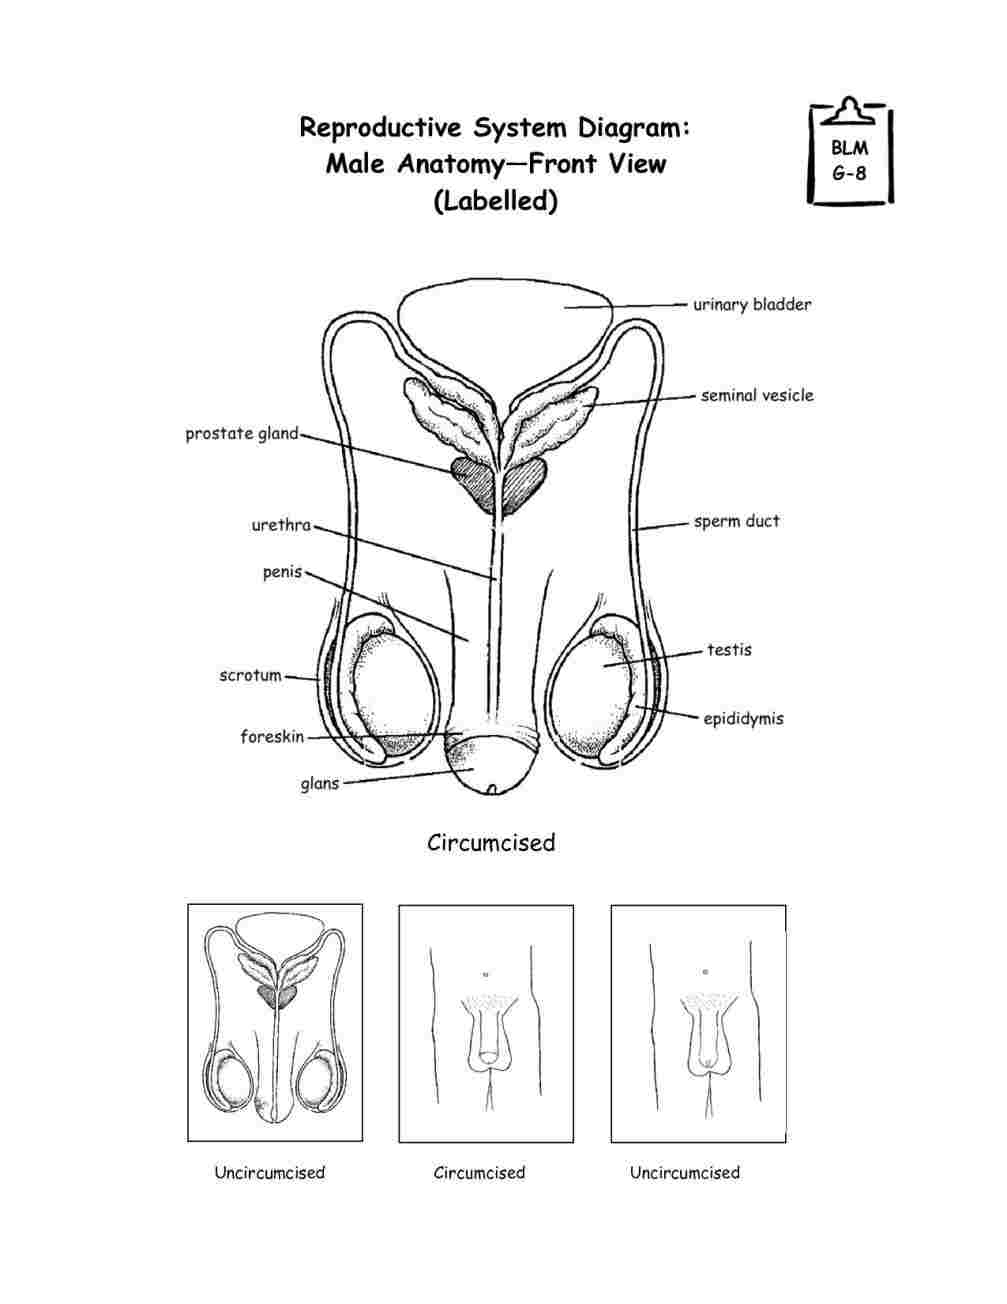 Male Reproductive System Diagram Male Reproductive System Unlabeled Diagram Of Anatomy